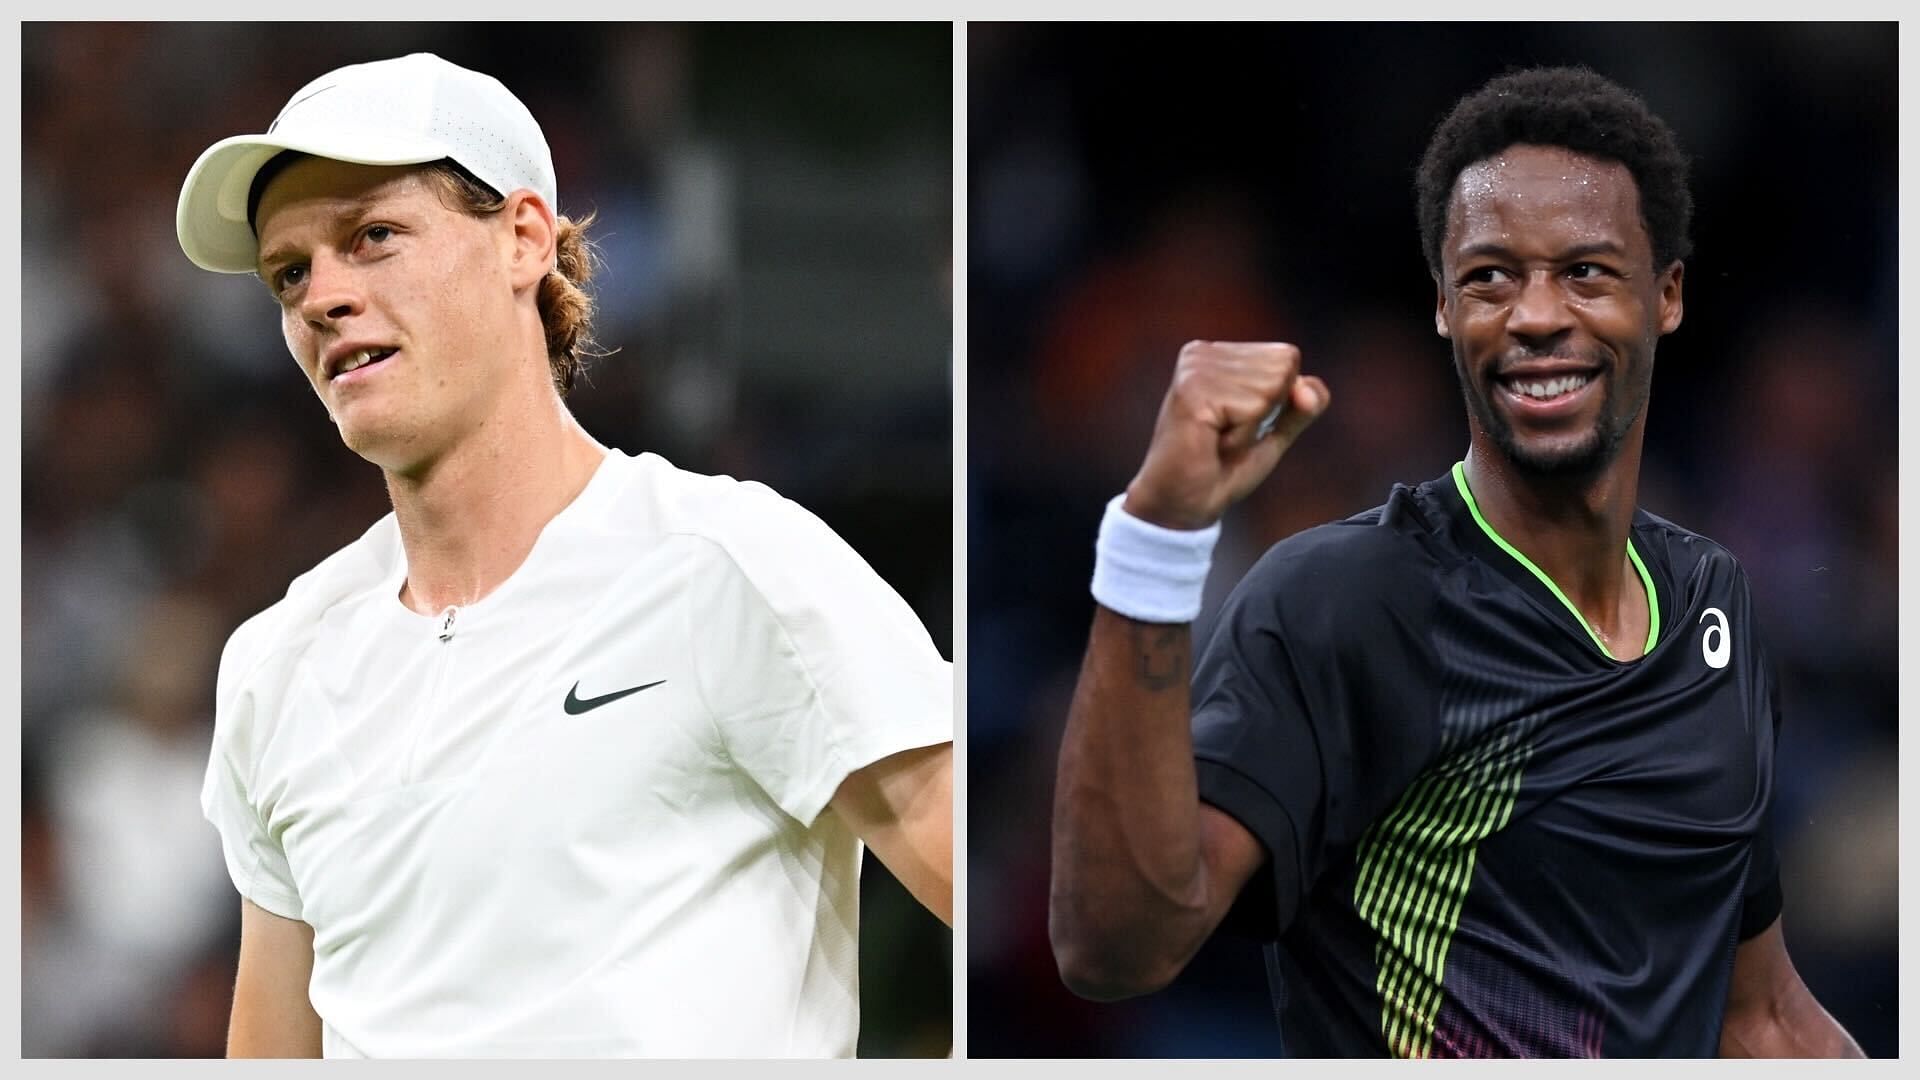 Jannik Sinner vs Gael Monfils is one of the quarterfinal matches at the 2023 Canadian Open.